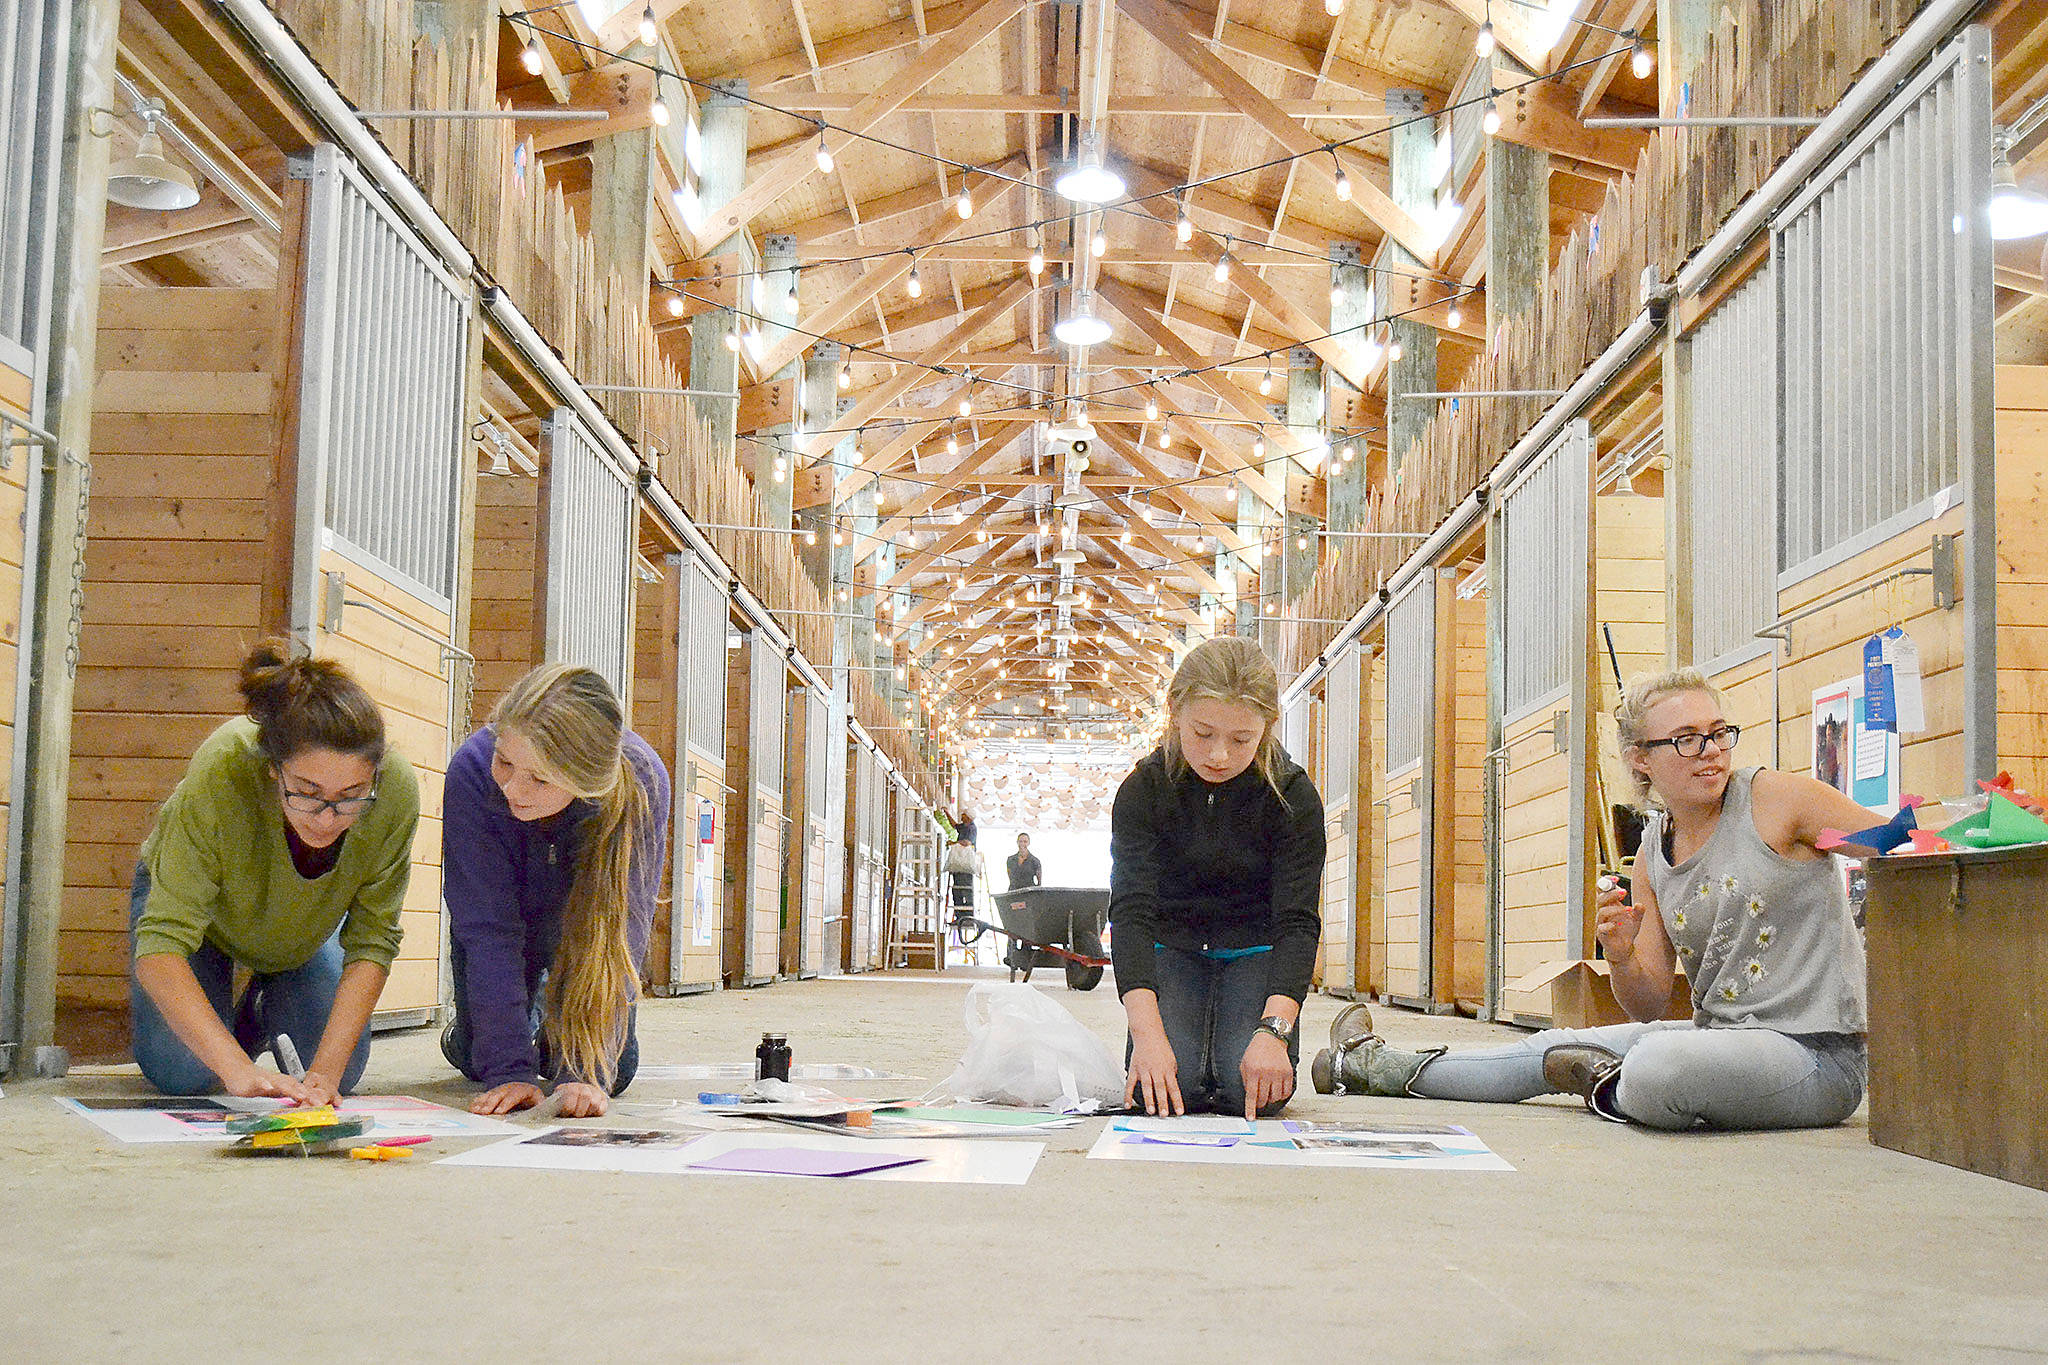 Members of the Silver Spurs 4-H Club — from left, Ashlyne Money, 16; Sierra Steffen, 12; Marissa Steffen, 10; and Lisi Hanson, 15 — design posters for their horses’ stalls Monday in a horse barn at the Clallam County Fairgrounds. Their group will show 18 horses throughout the fair, which runs through Sunday. (Matthew Nash/Olympic Peninsula News Group)